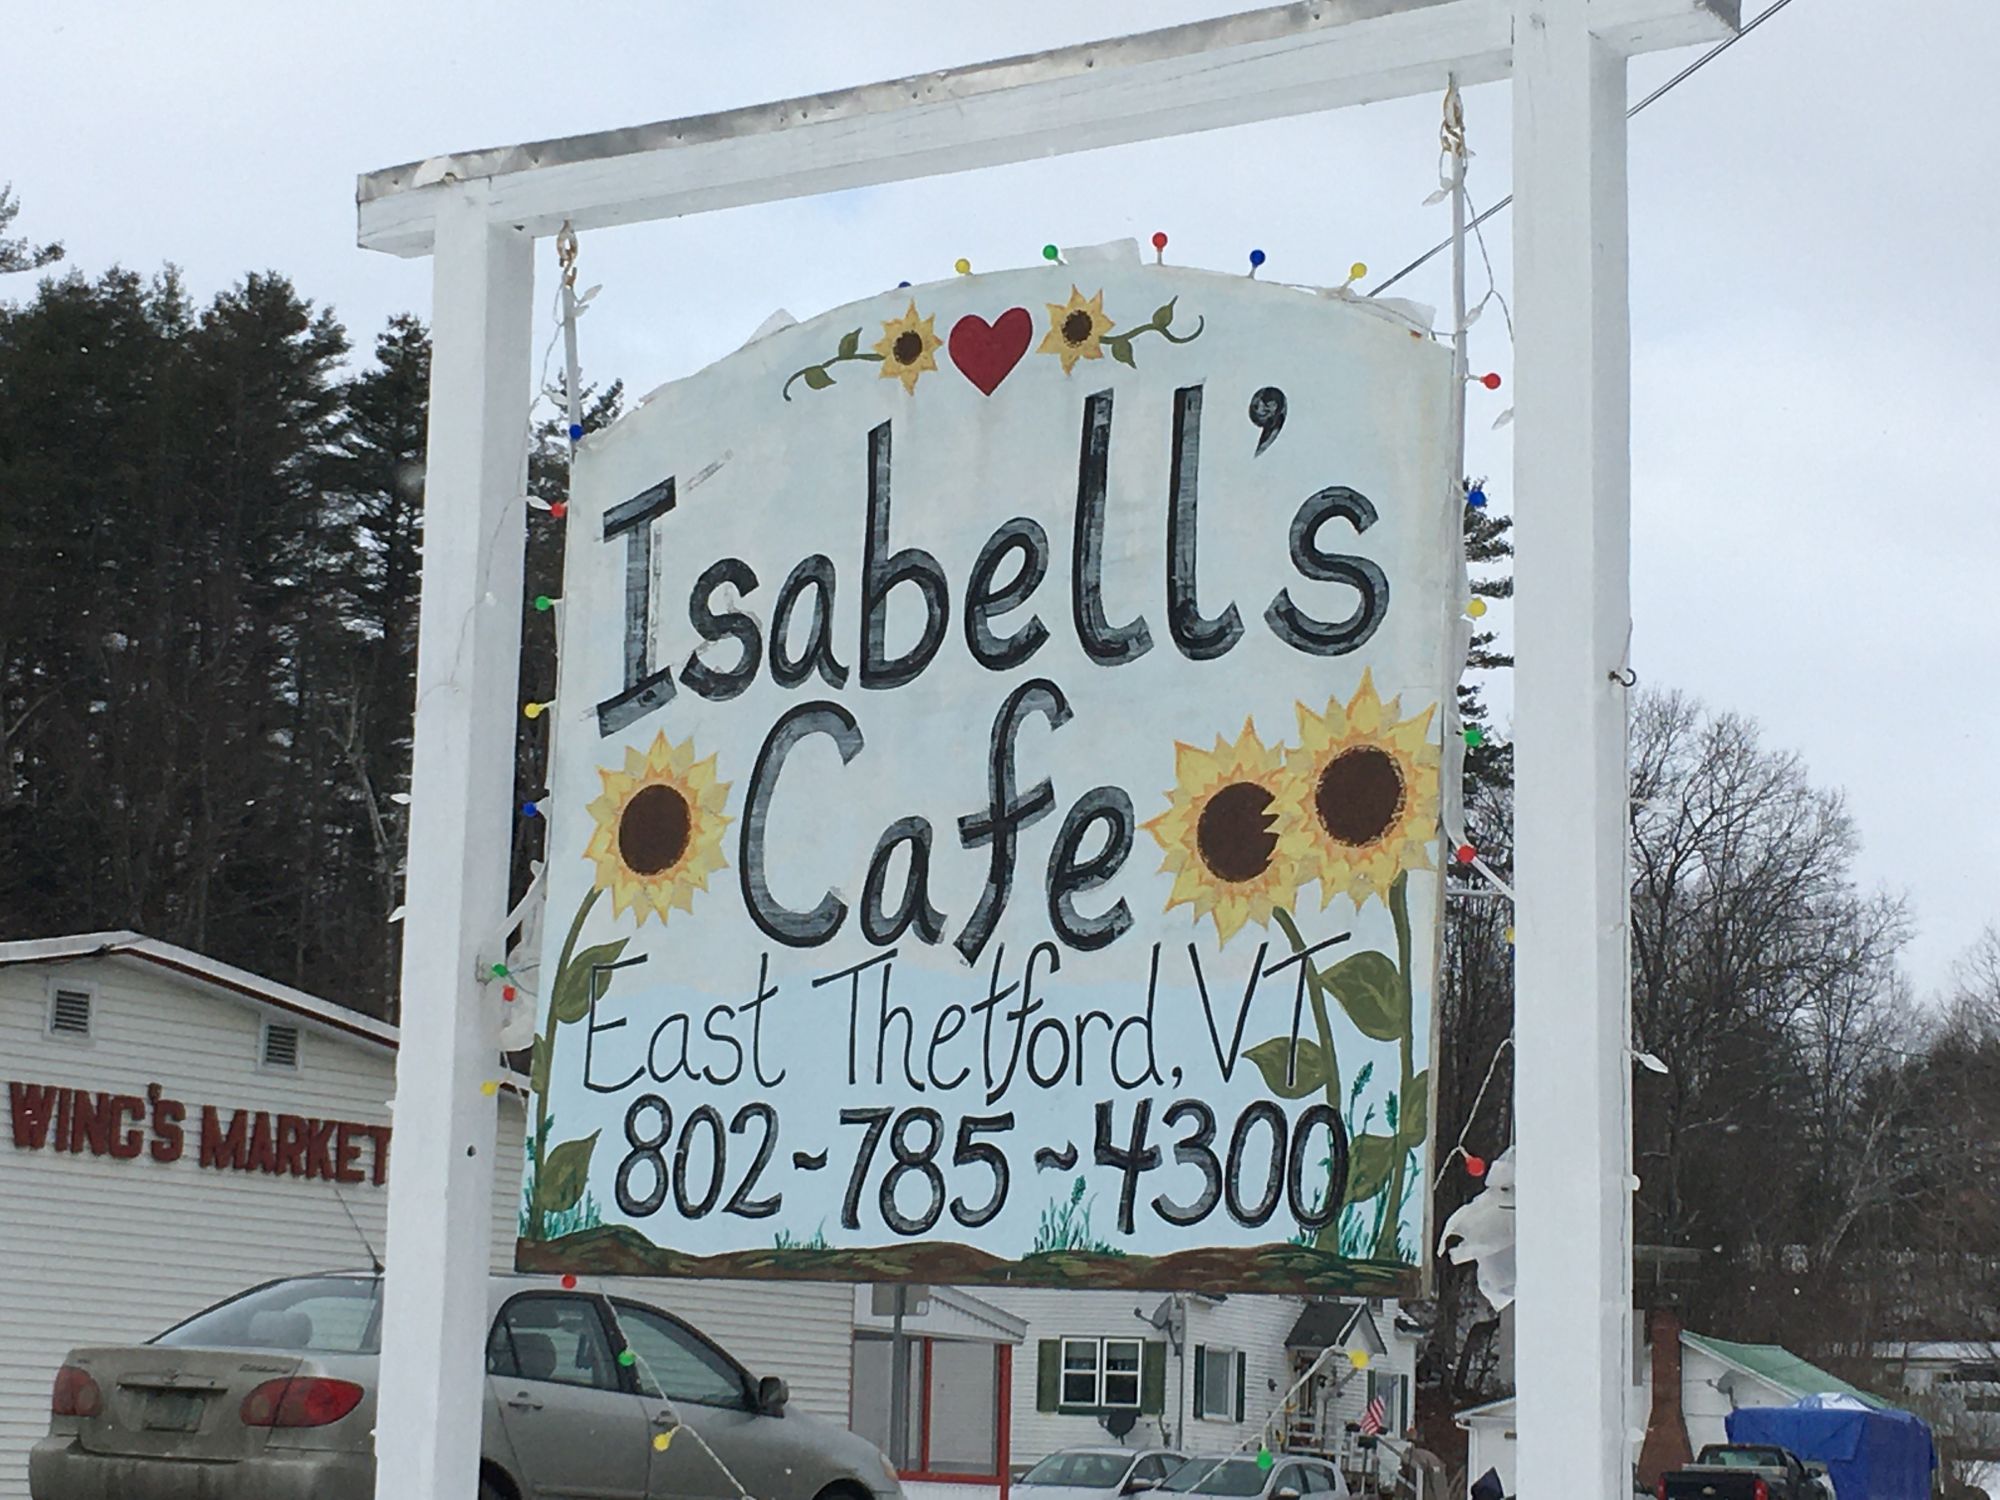 The full scoop on Isabell's